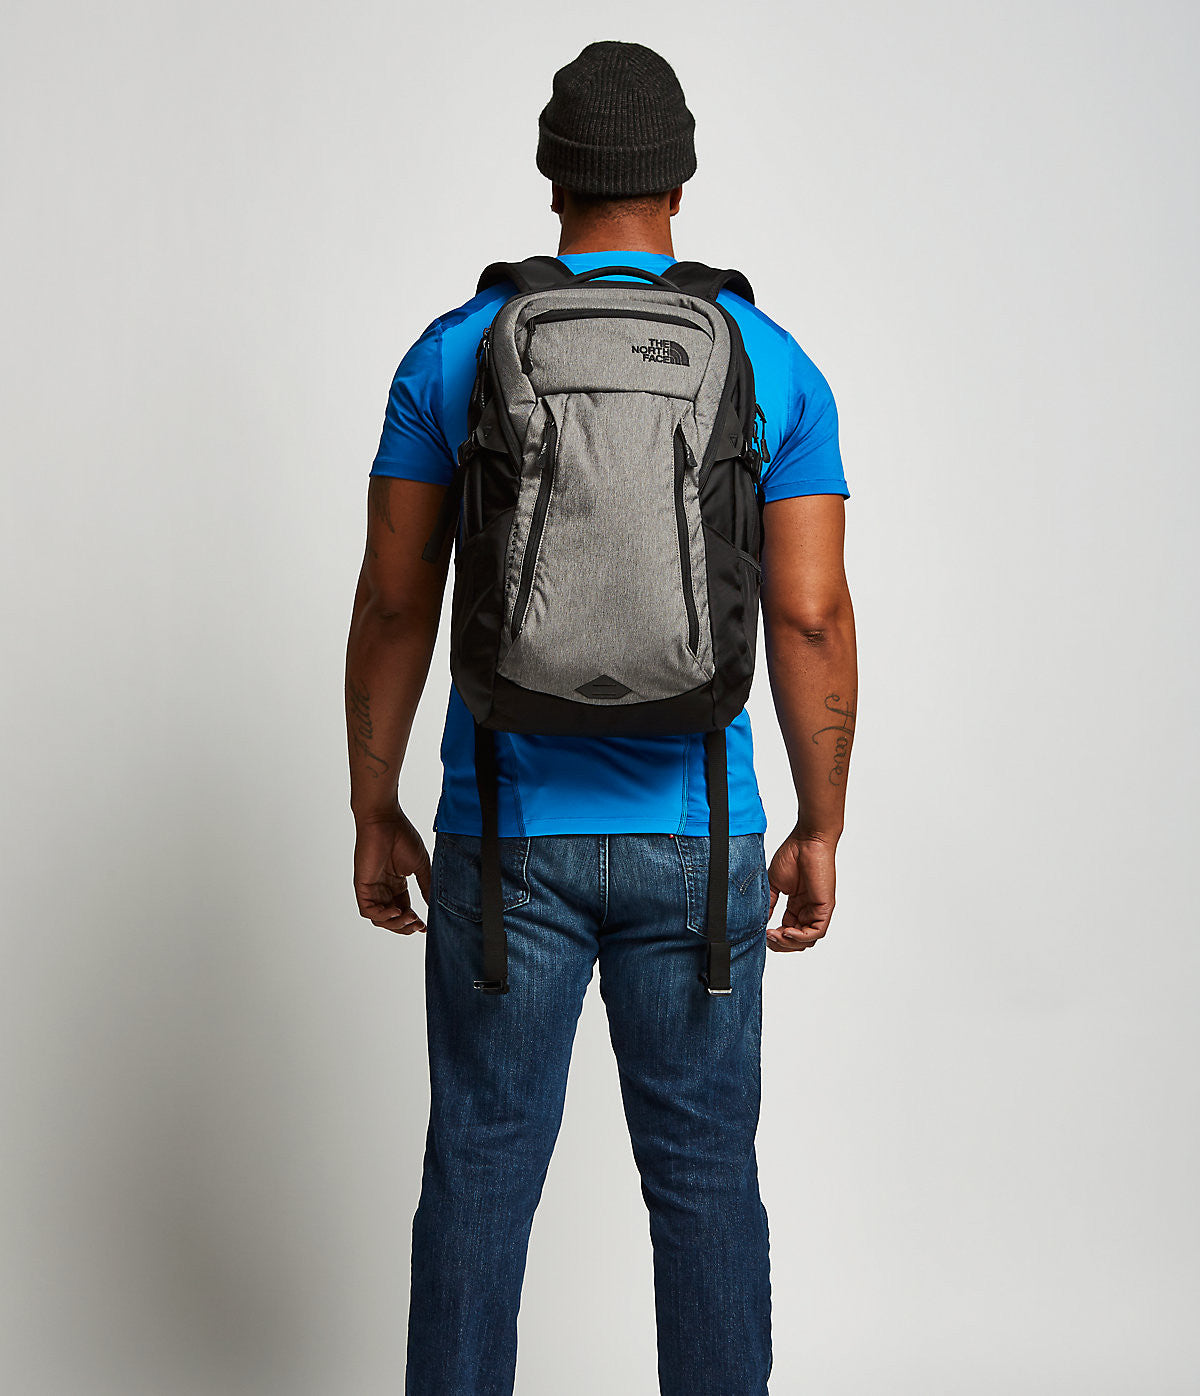 router transit backpack dimensions